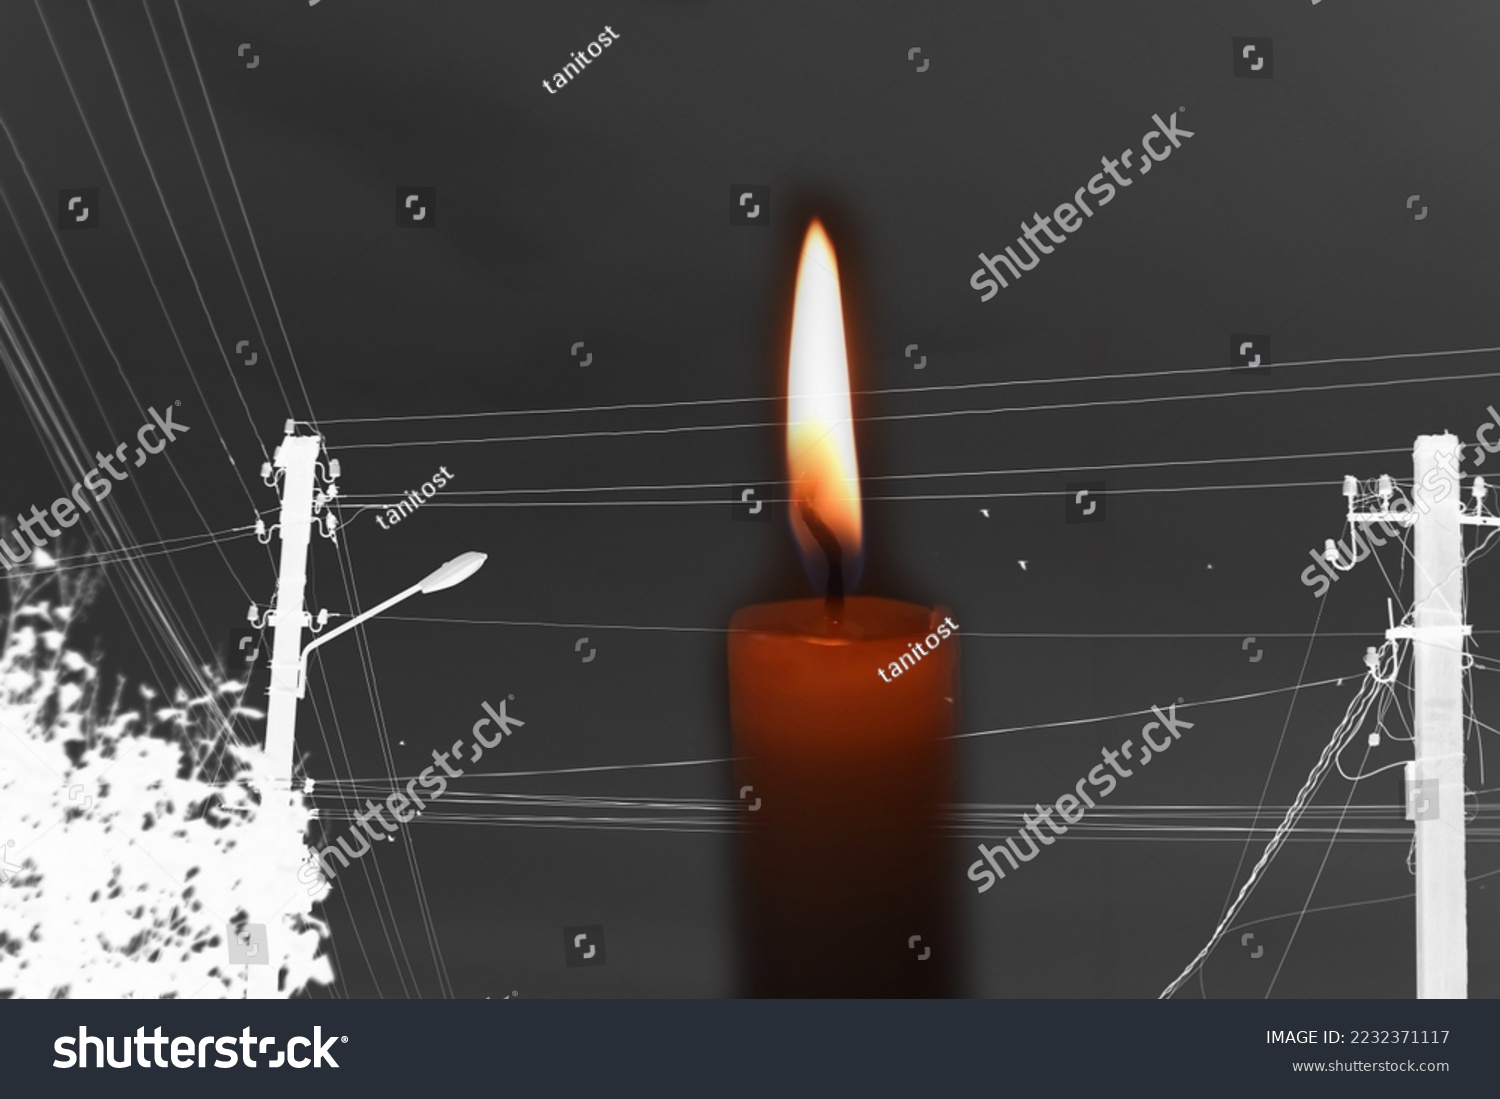 Blackout – power grid overloaded. Blackout concept. Earth hour. Burning flame candle and power lines on background. Energy crisis. Dark night. Candle flame. Voltage equipment. #2232371117